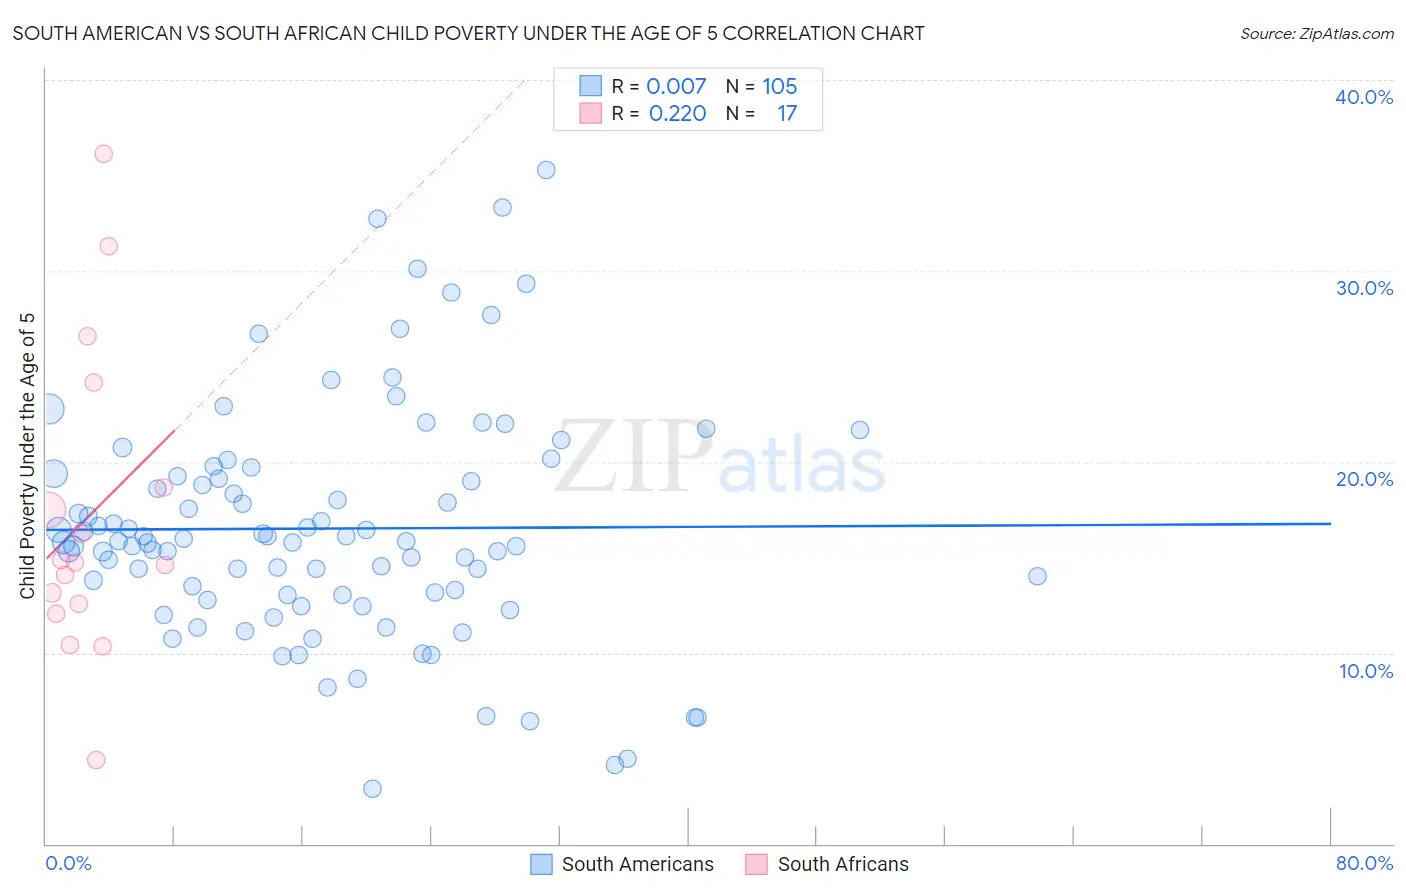 South American vs South African Child Poverty Under the Age of 5